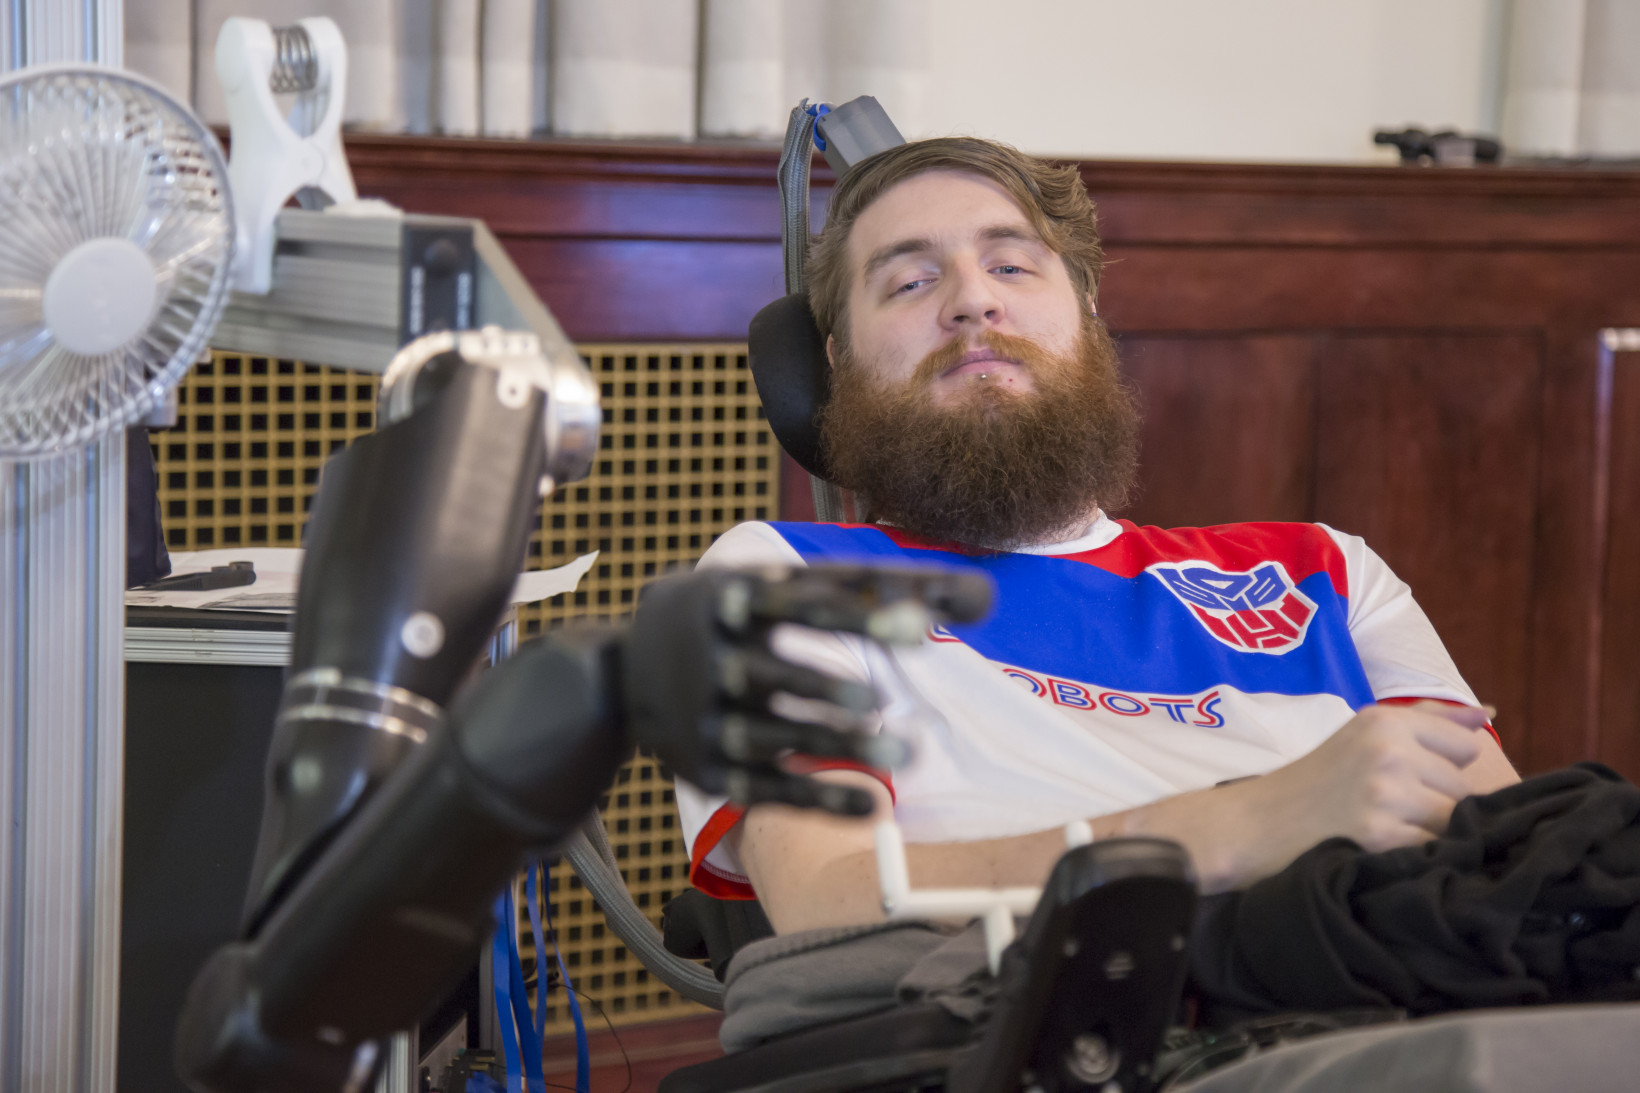 Nathan Copeland, who was left quadriplegic after a car accident in 2004, has had a BCI implanted in his brain